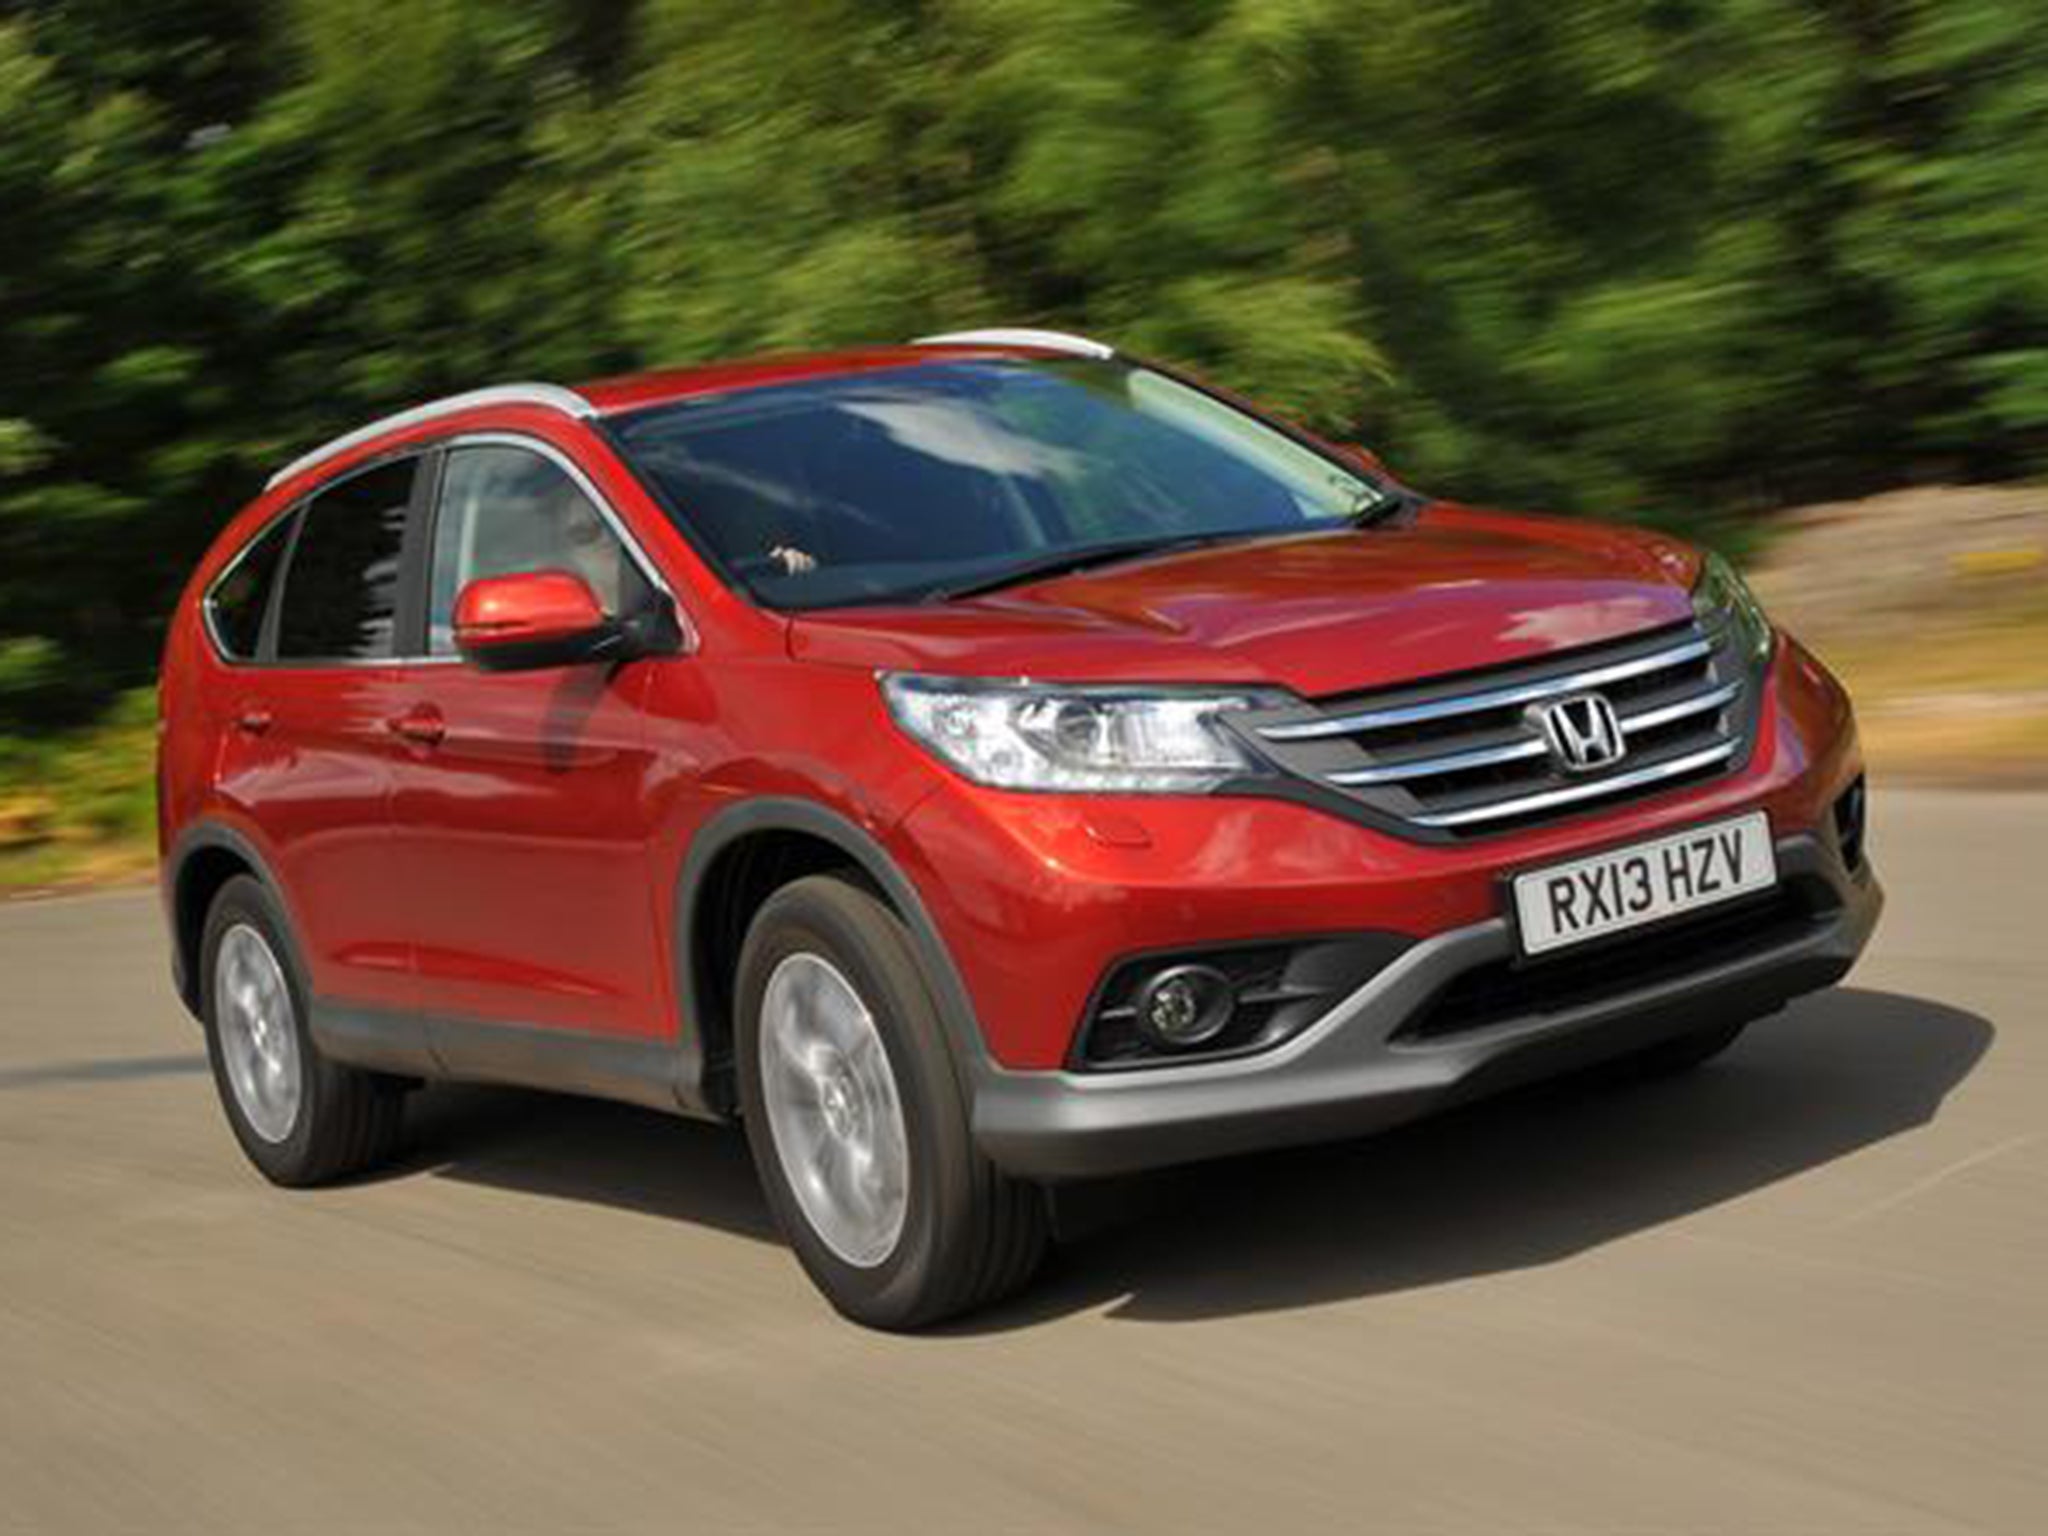 The top 10 most economical SUVs | The Independent